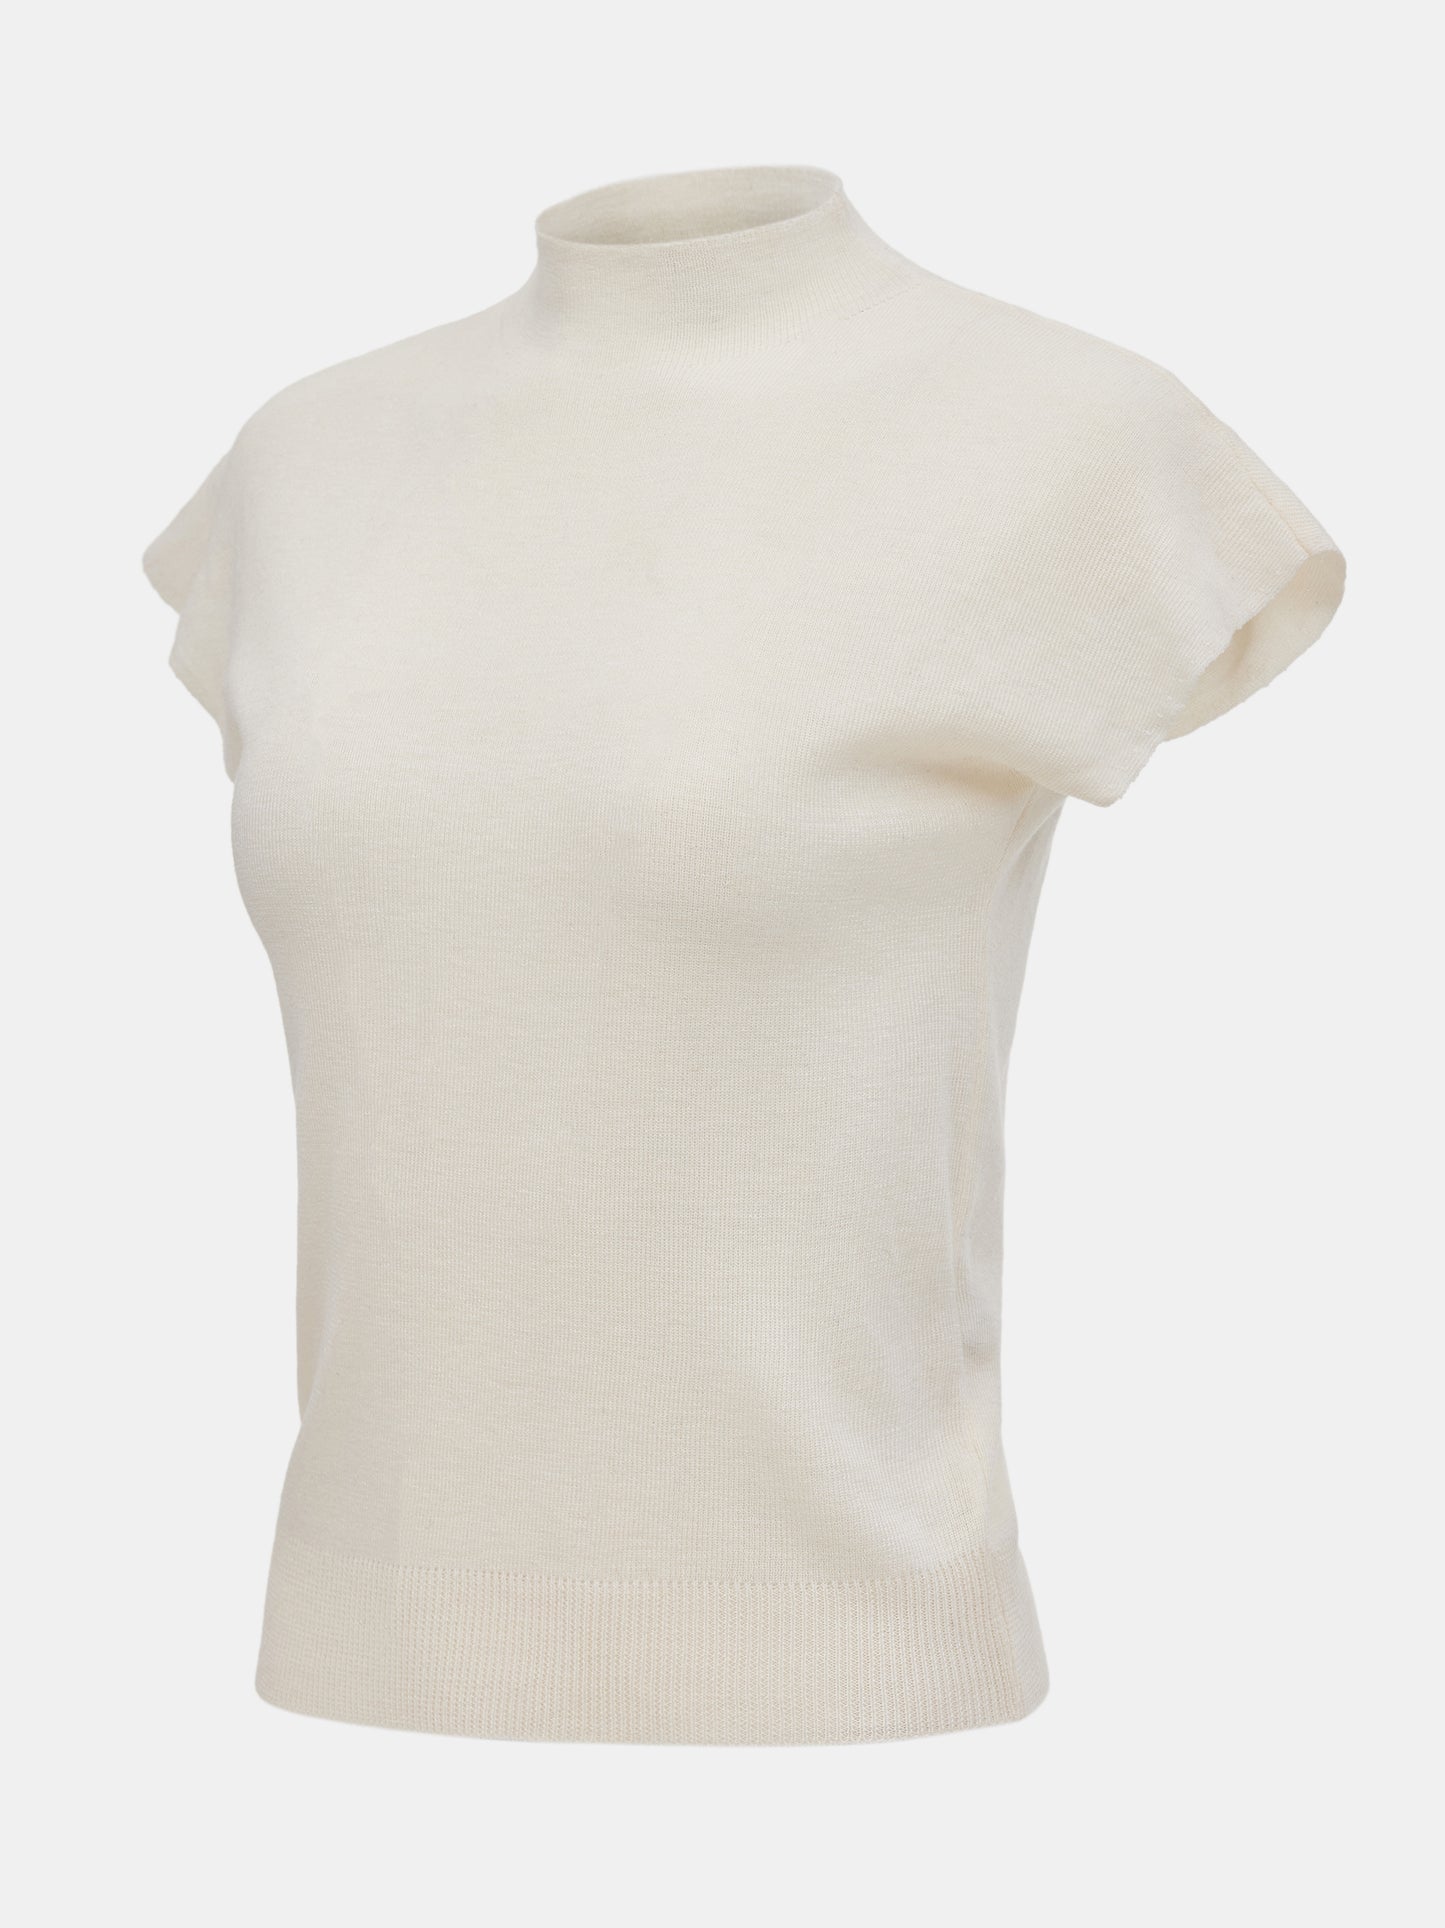 High-Neck Compact Knit, Ivory